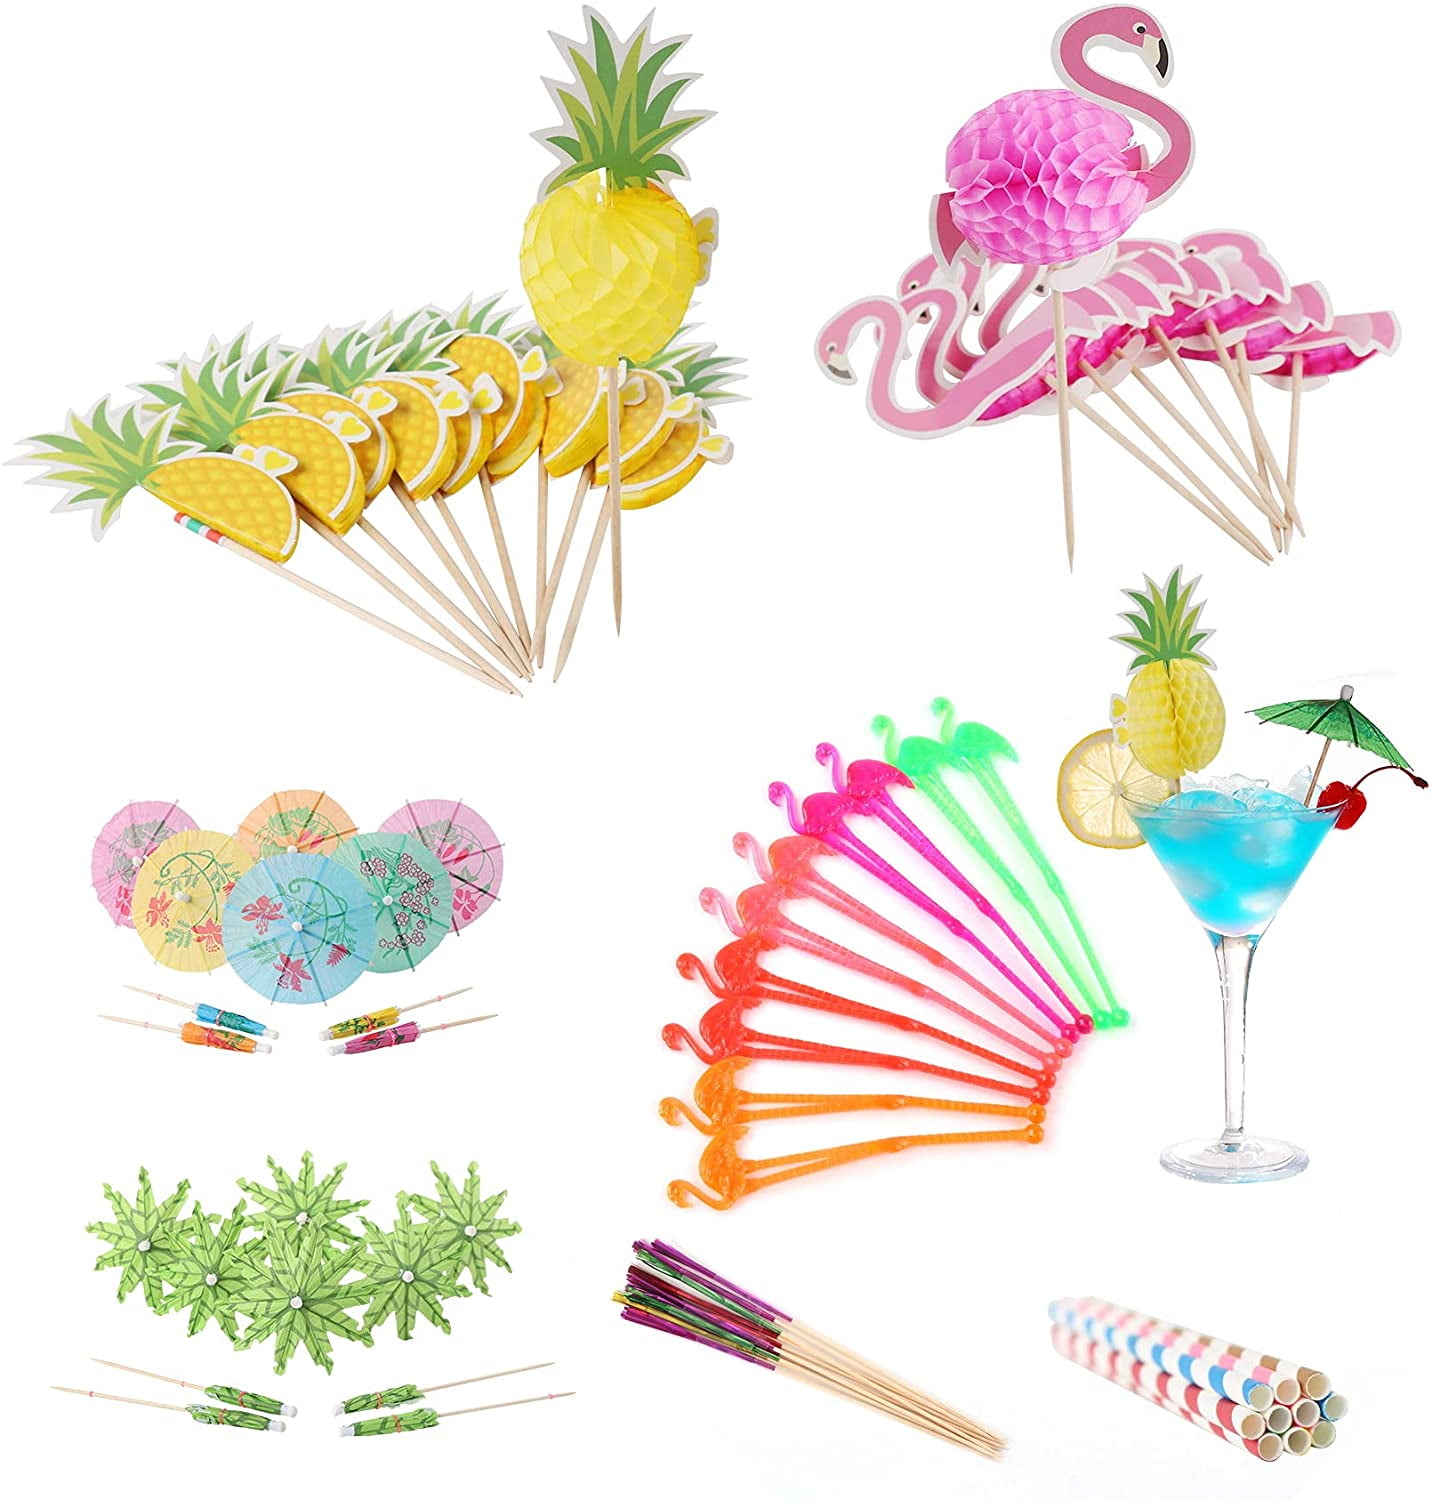 Cocktail Sticks,100 Pcs Colorful Palm Tree Picks Cocktail Accessories for Home Bar beach Party Birthday Wedding 